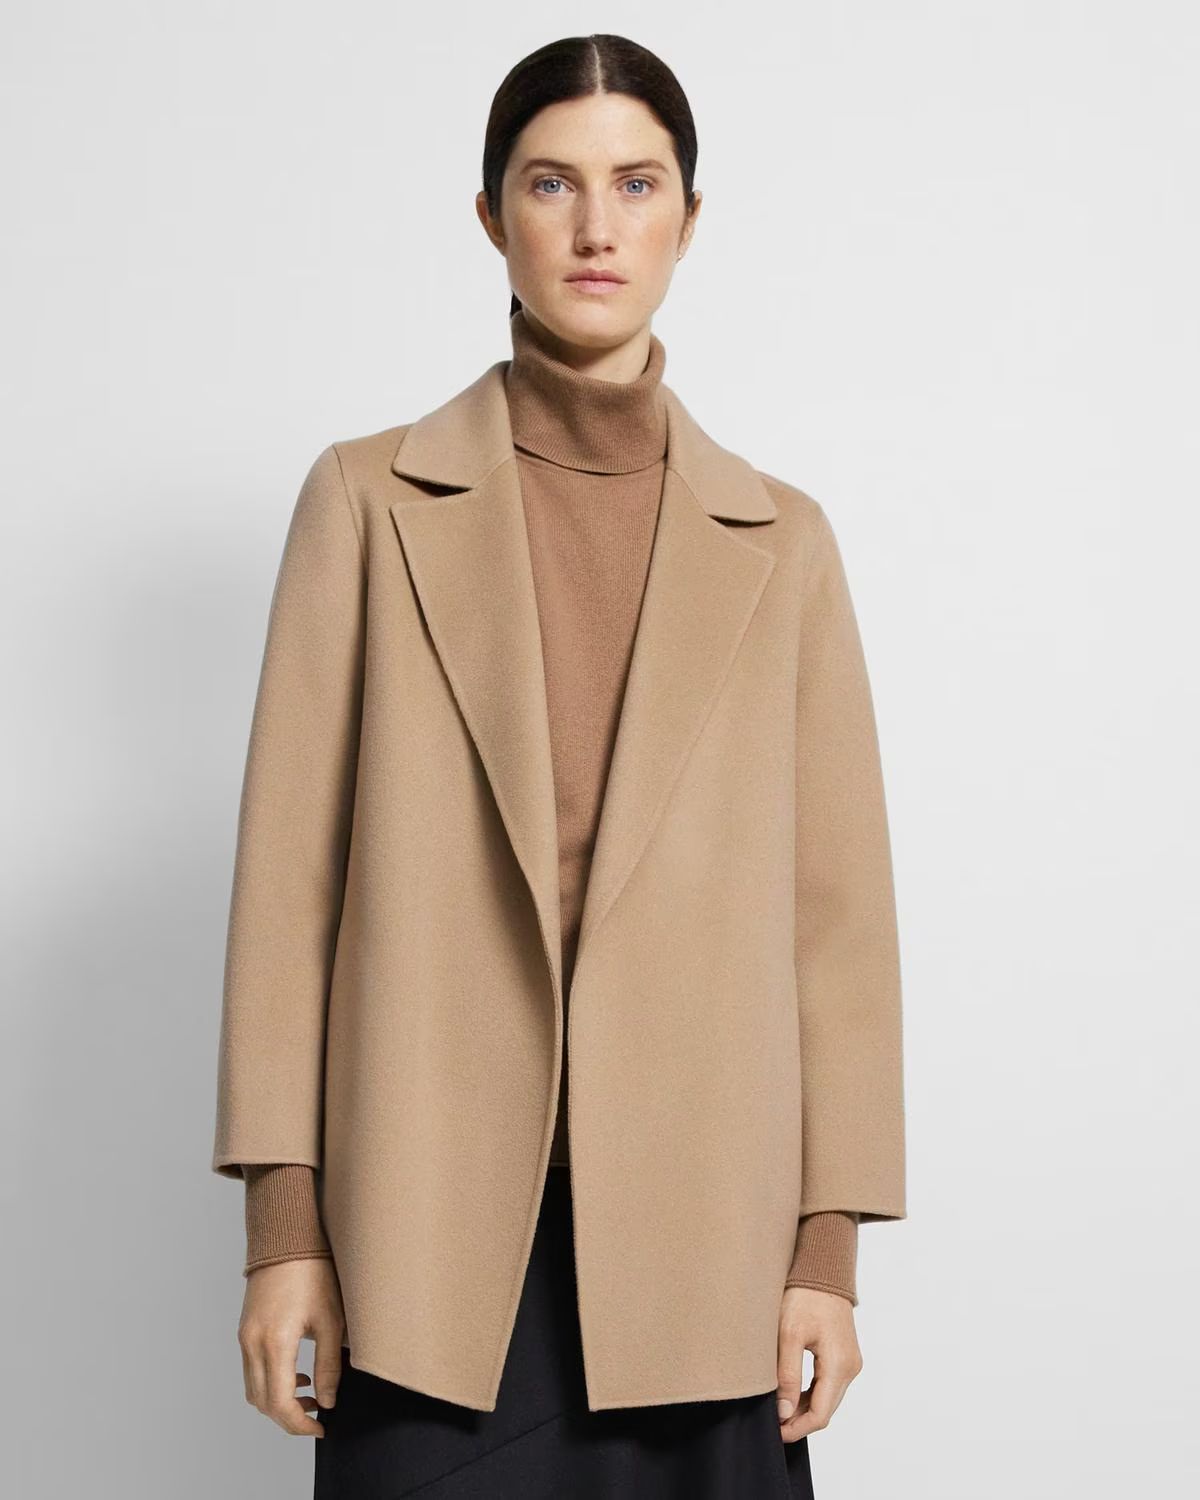 Clairene Jacket in Double-Face Wool-Cashmere | Theory